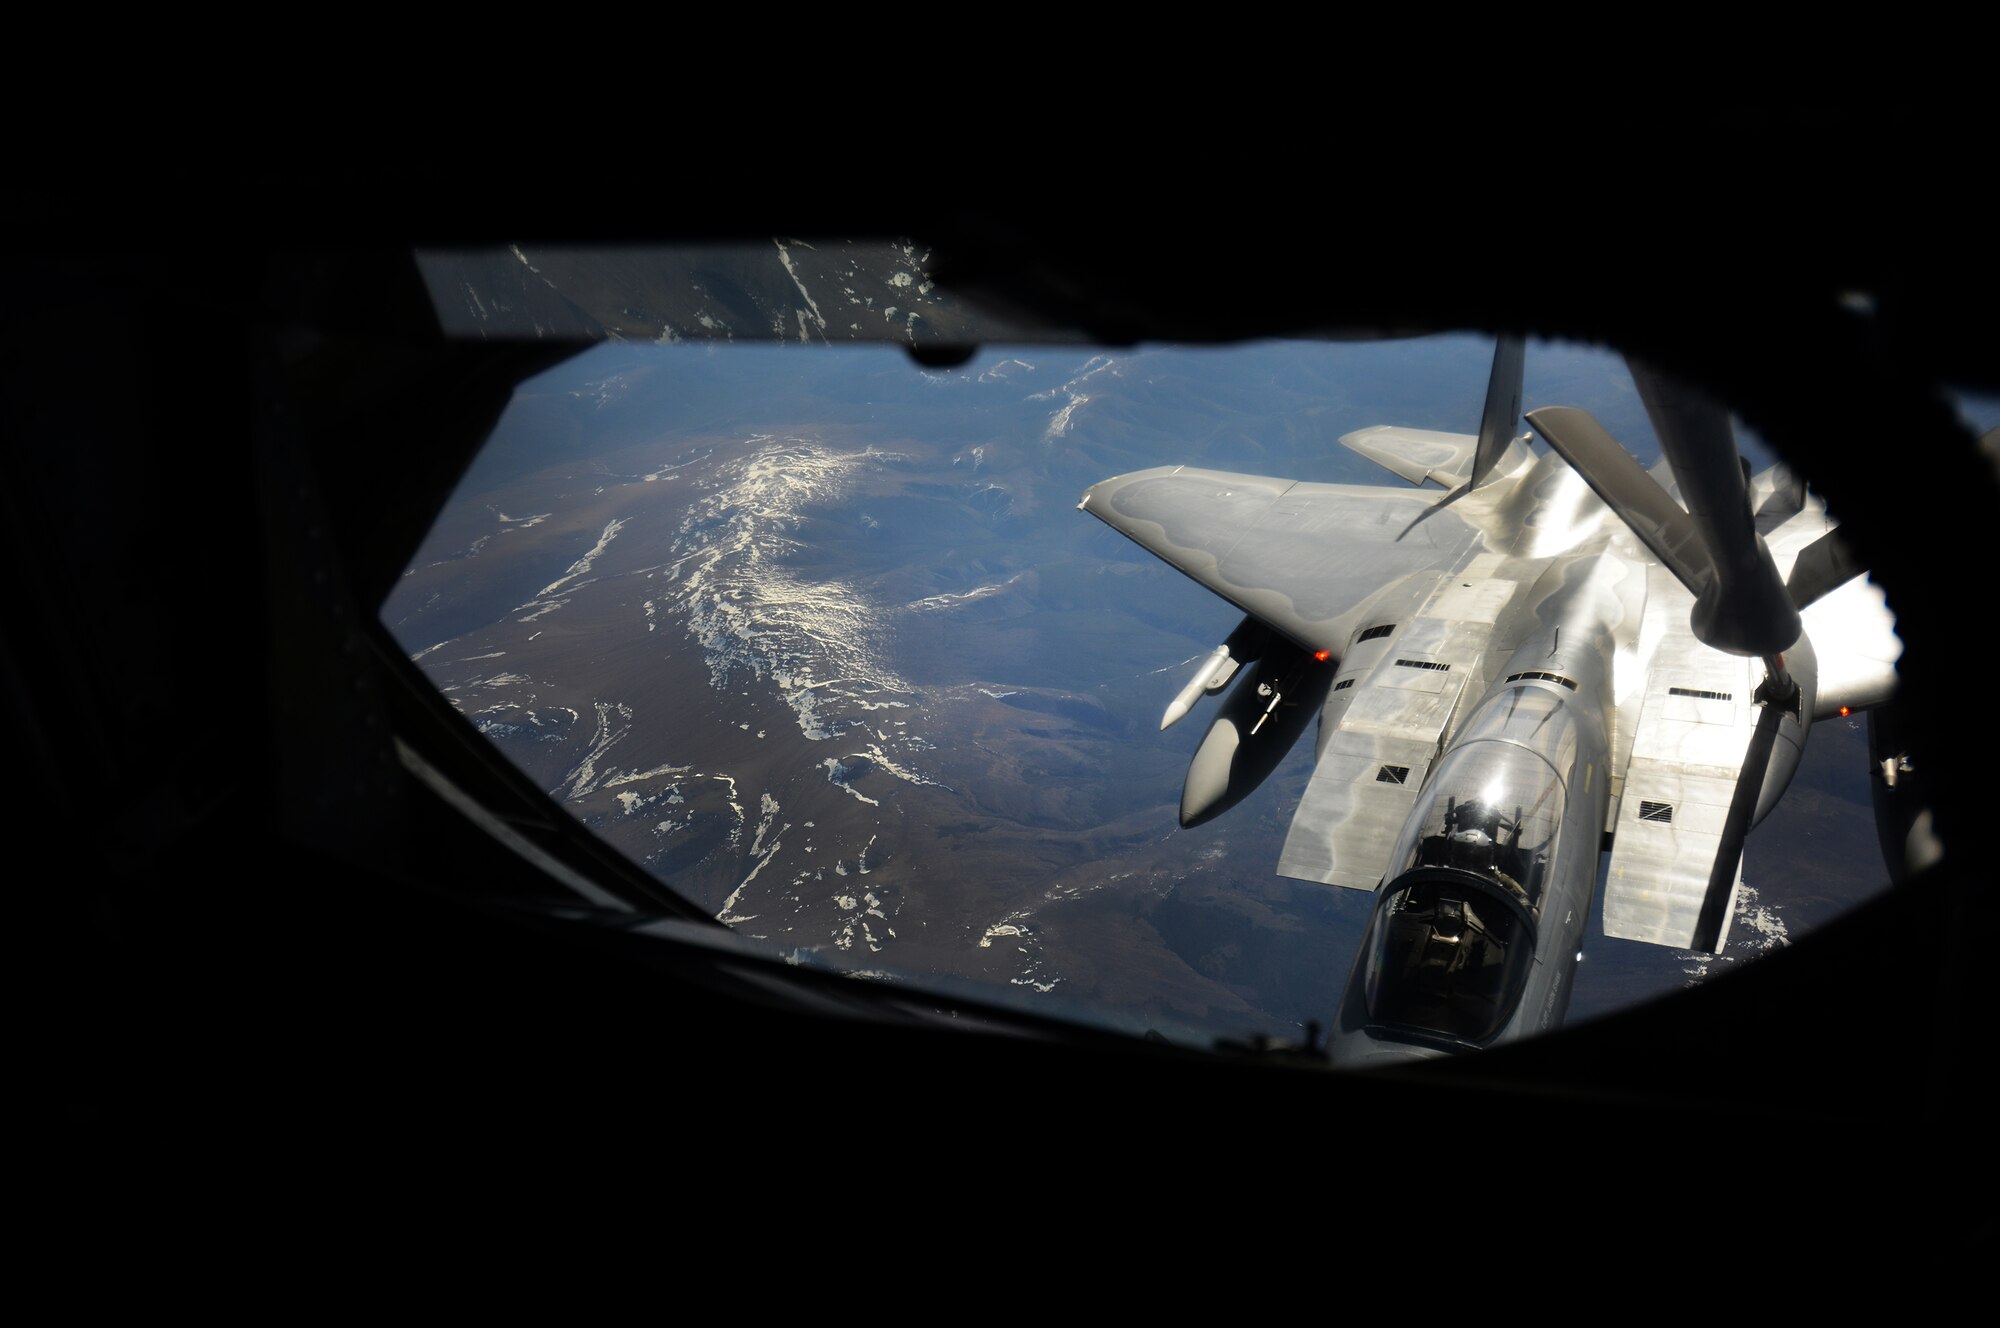 An F-15C Eagle aircraft with the 67th Fighter Squadron, Kadena Air Base, Japan, receives fuel from a KC-135 Stratotanker from the 909th Air Refueling Squadron, Kadena Air Base, Japan, May 12, 2016, inside the Joint Pacific Alaska Range Complex. The KC-135 provides the core aerial refueling capability for the United States Air Force and has excelled in this role for more than 50 years working to accomplish its primary mission of global reach. (U.S. Air Force photo by Tech. Sgt. Steven R. Doty)